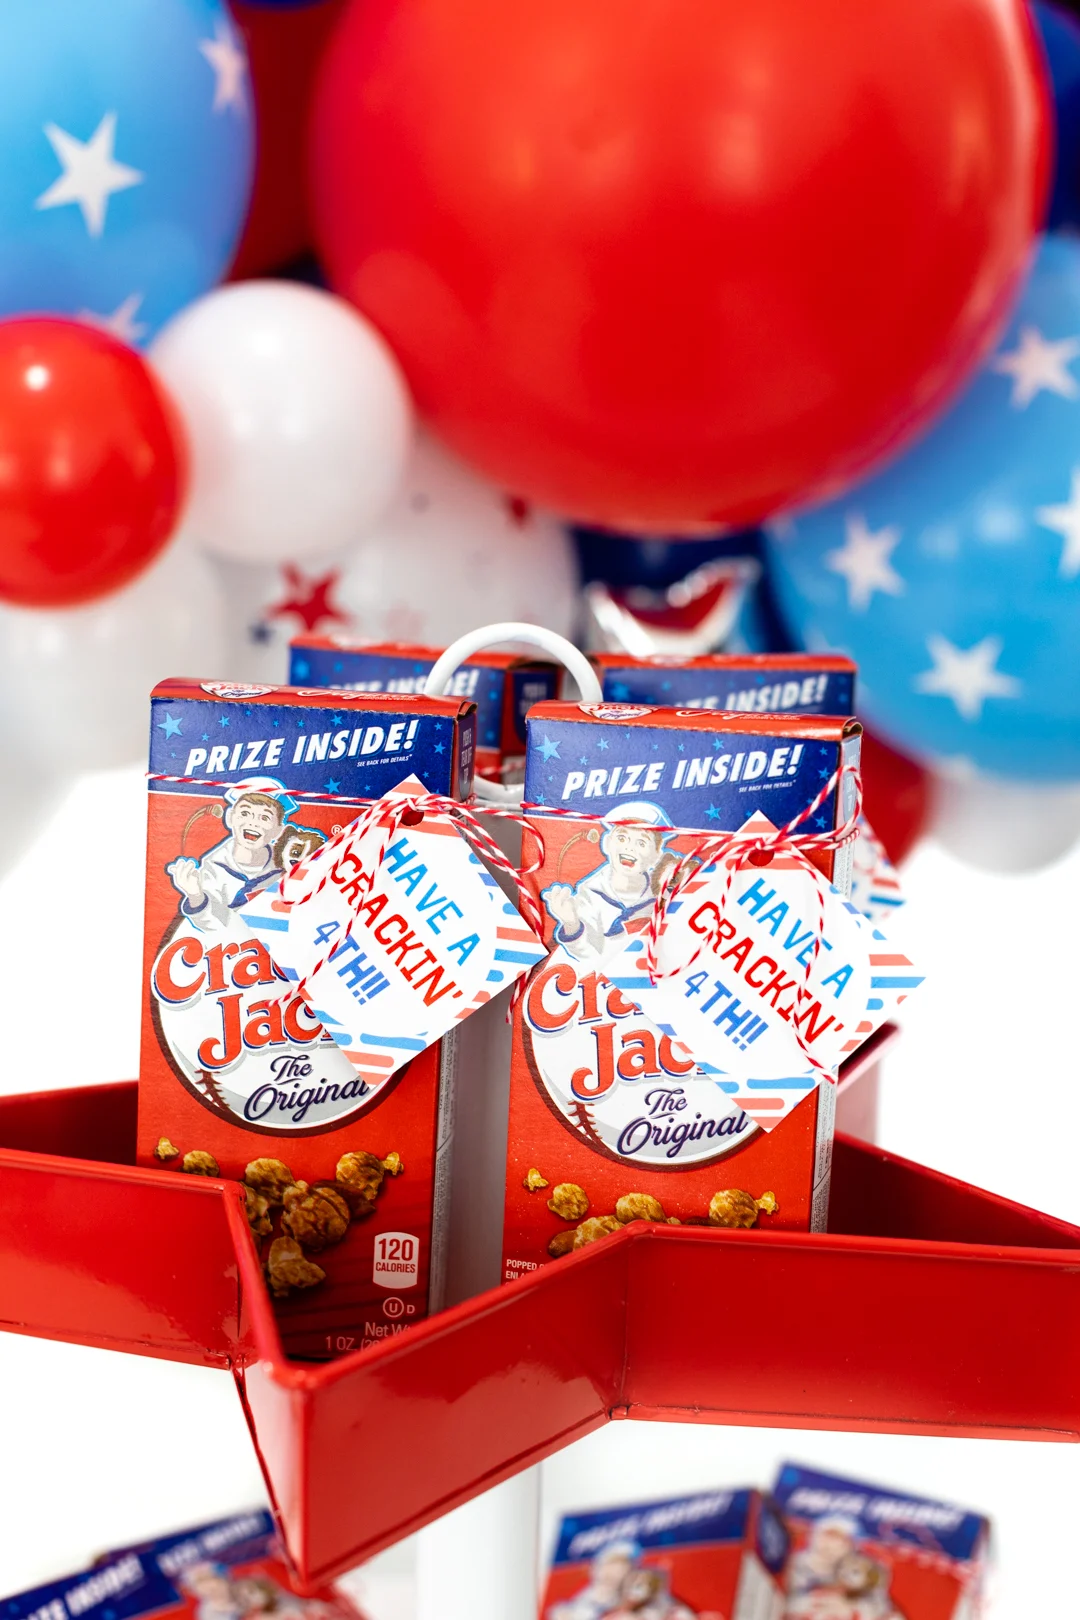 Individual boxes of cracker jack served on a 4th of july tray for parties. balloons in background